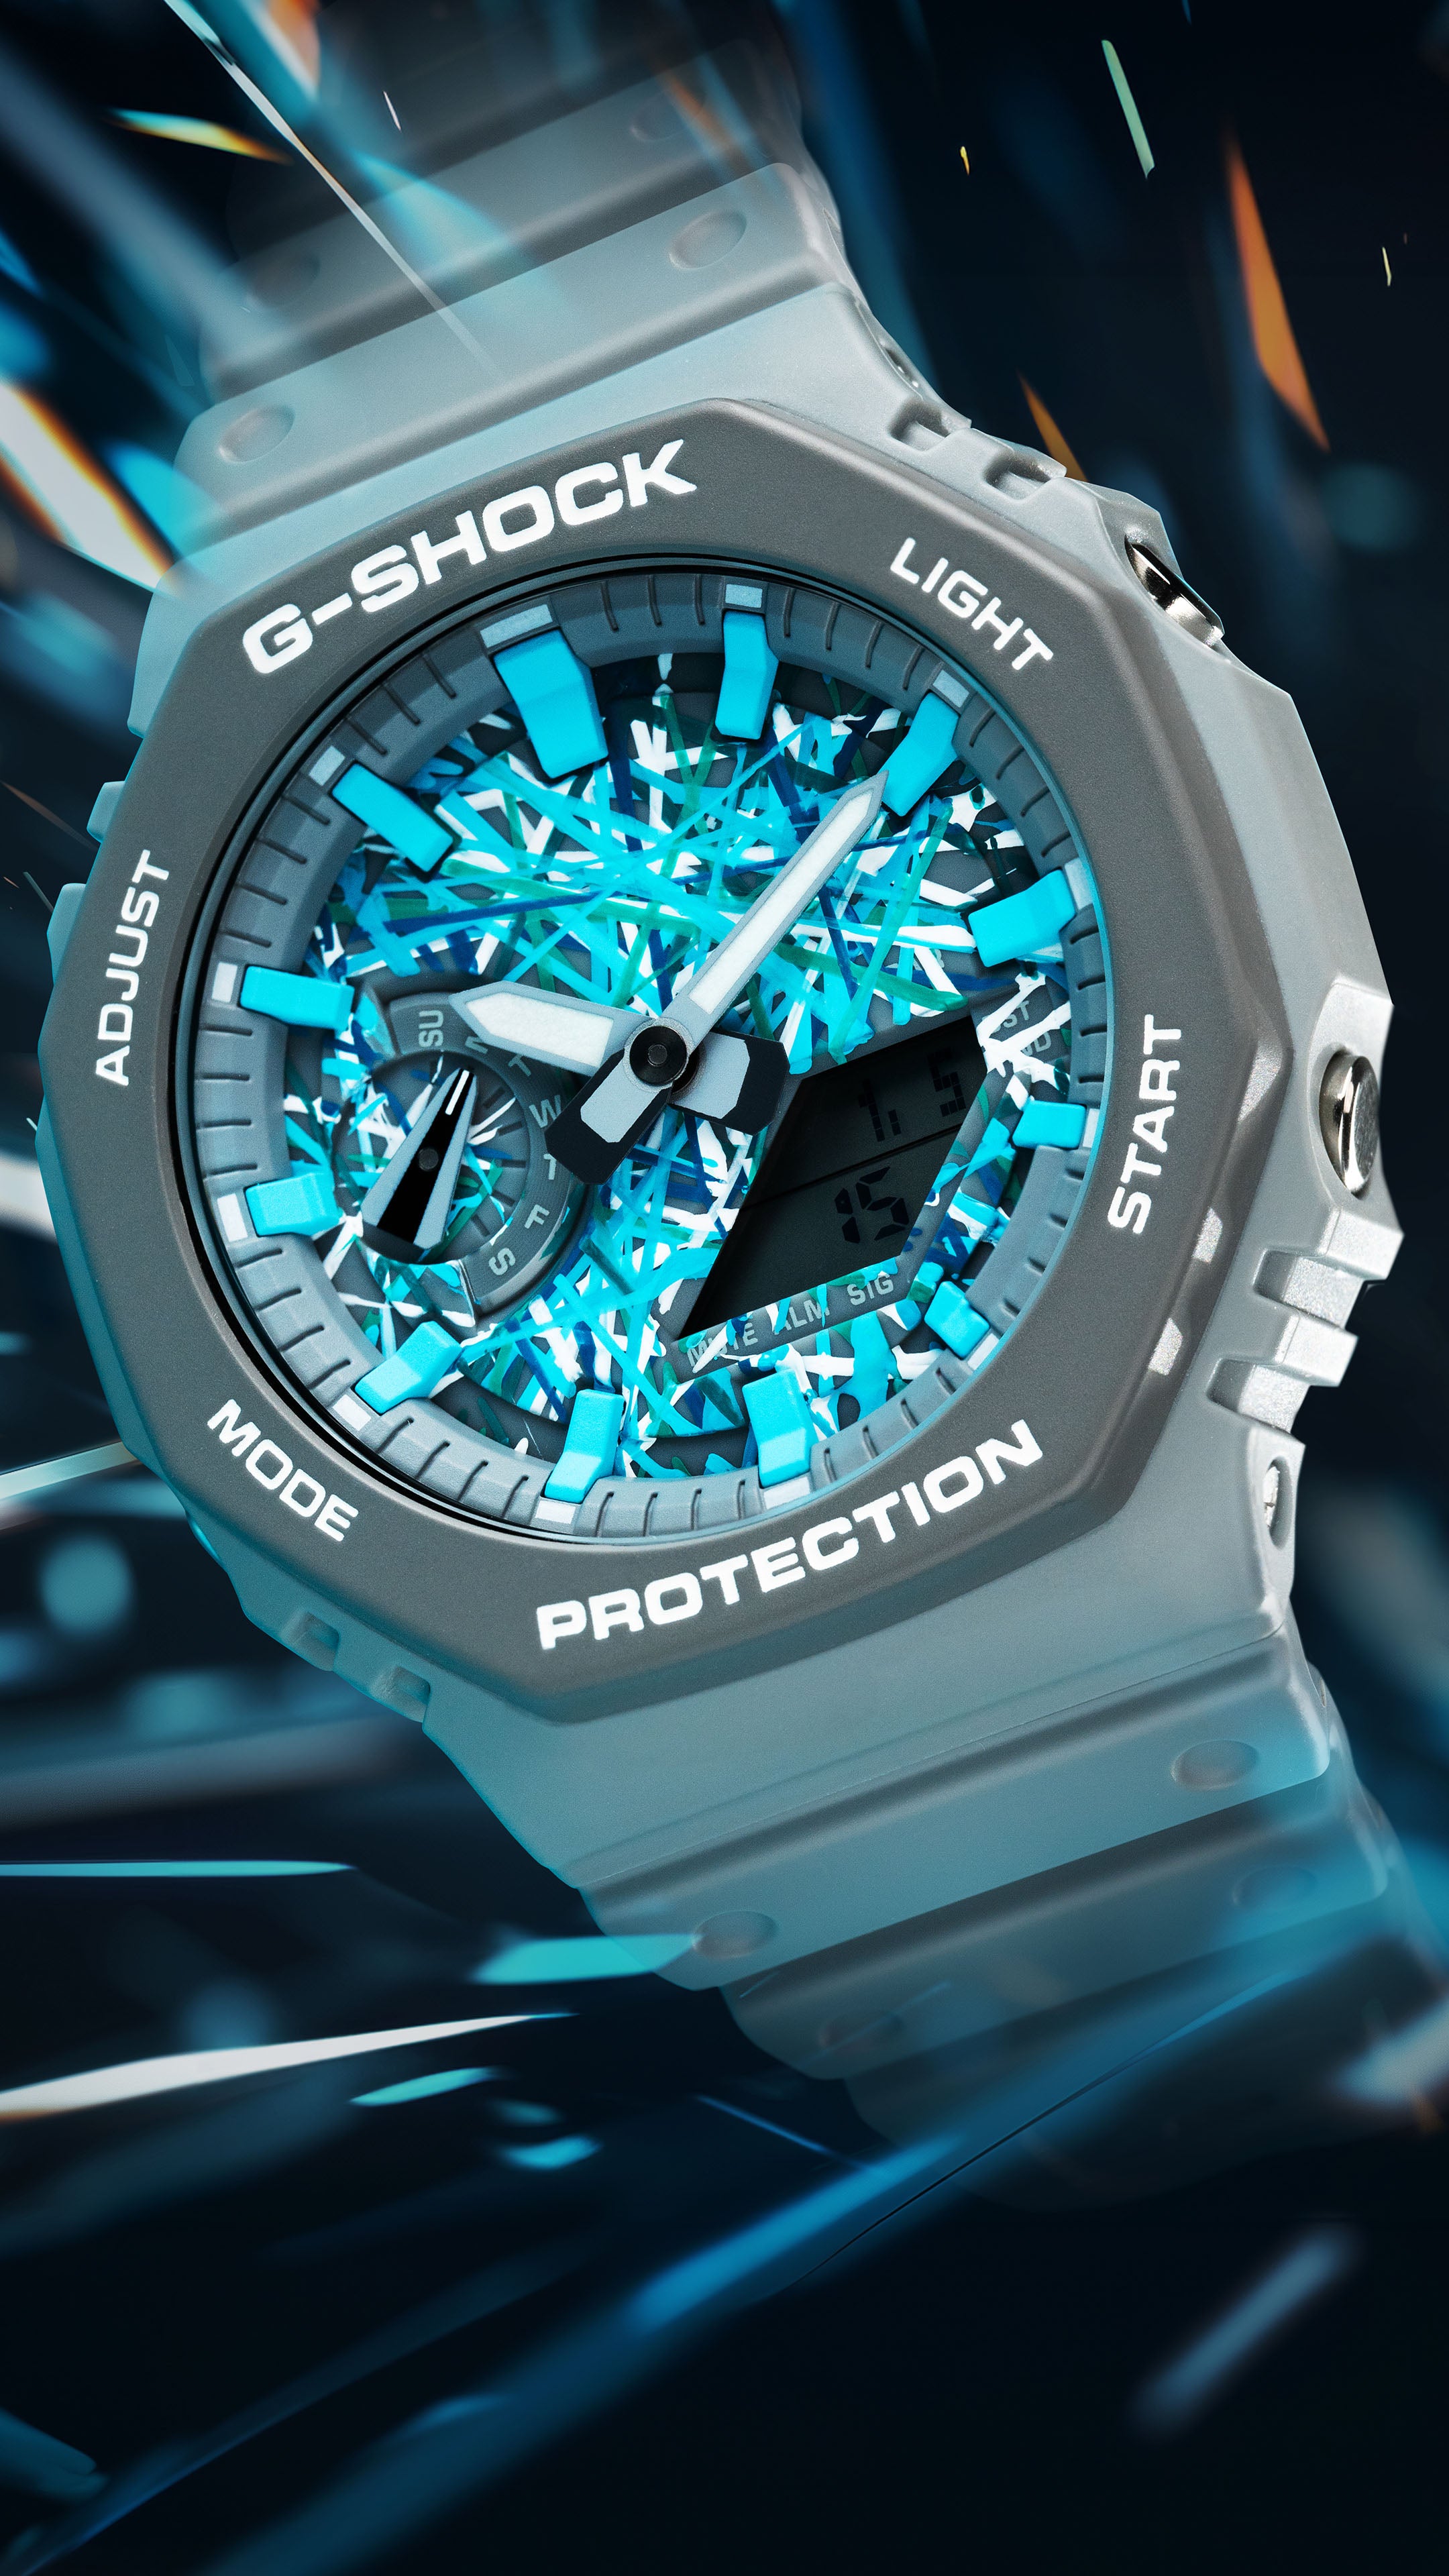 Limited Edition G-Shock CasiOak with Custom Turquoise Artwork Detailing